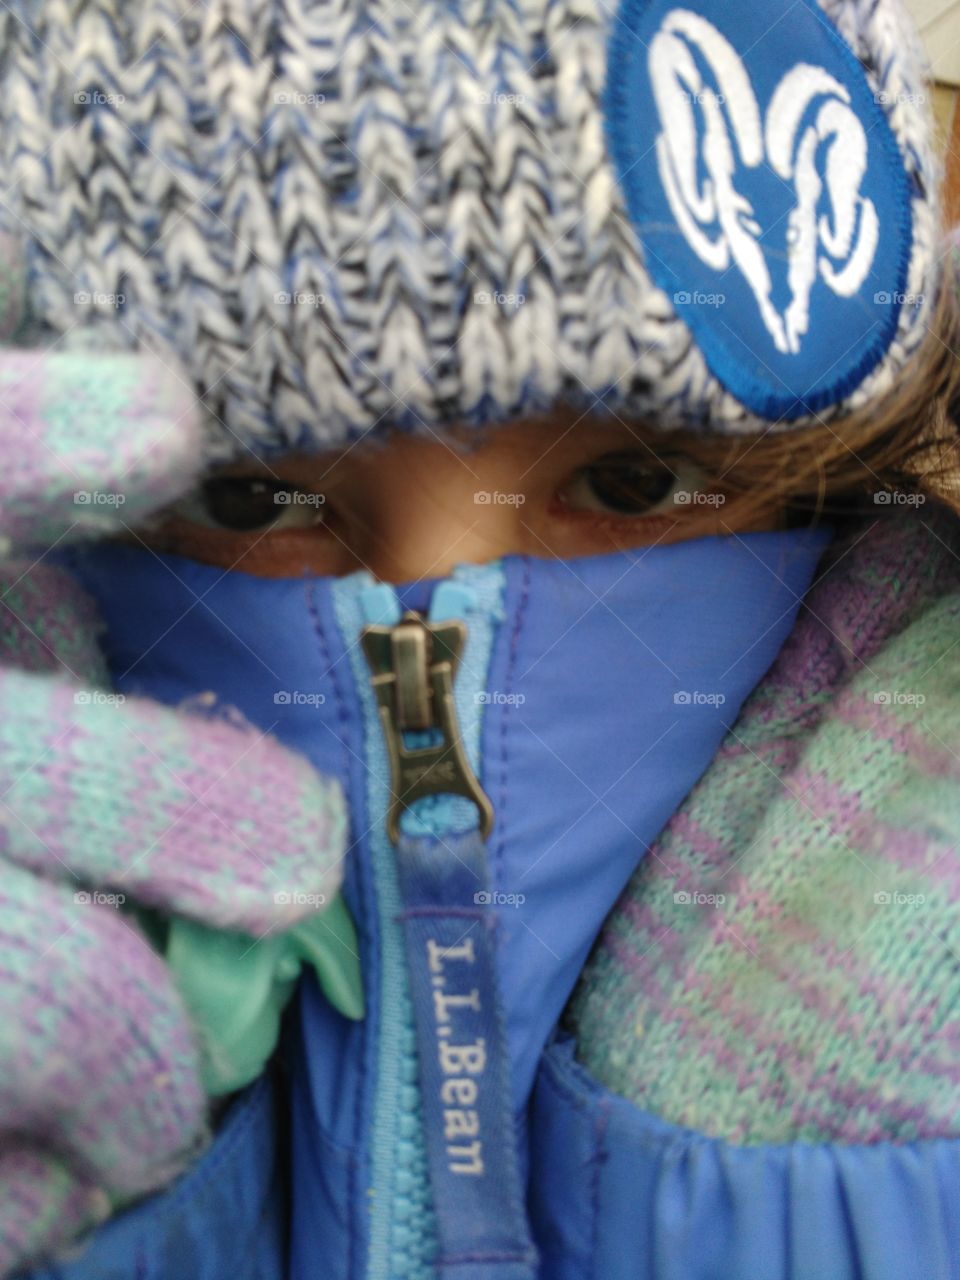 bundled up for the walk to school